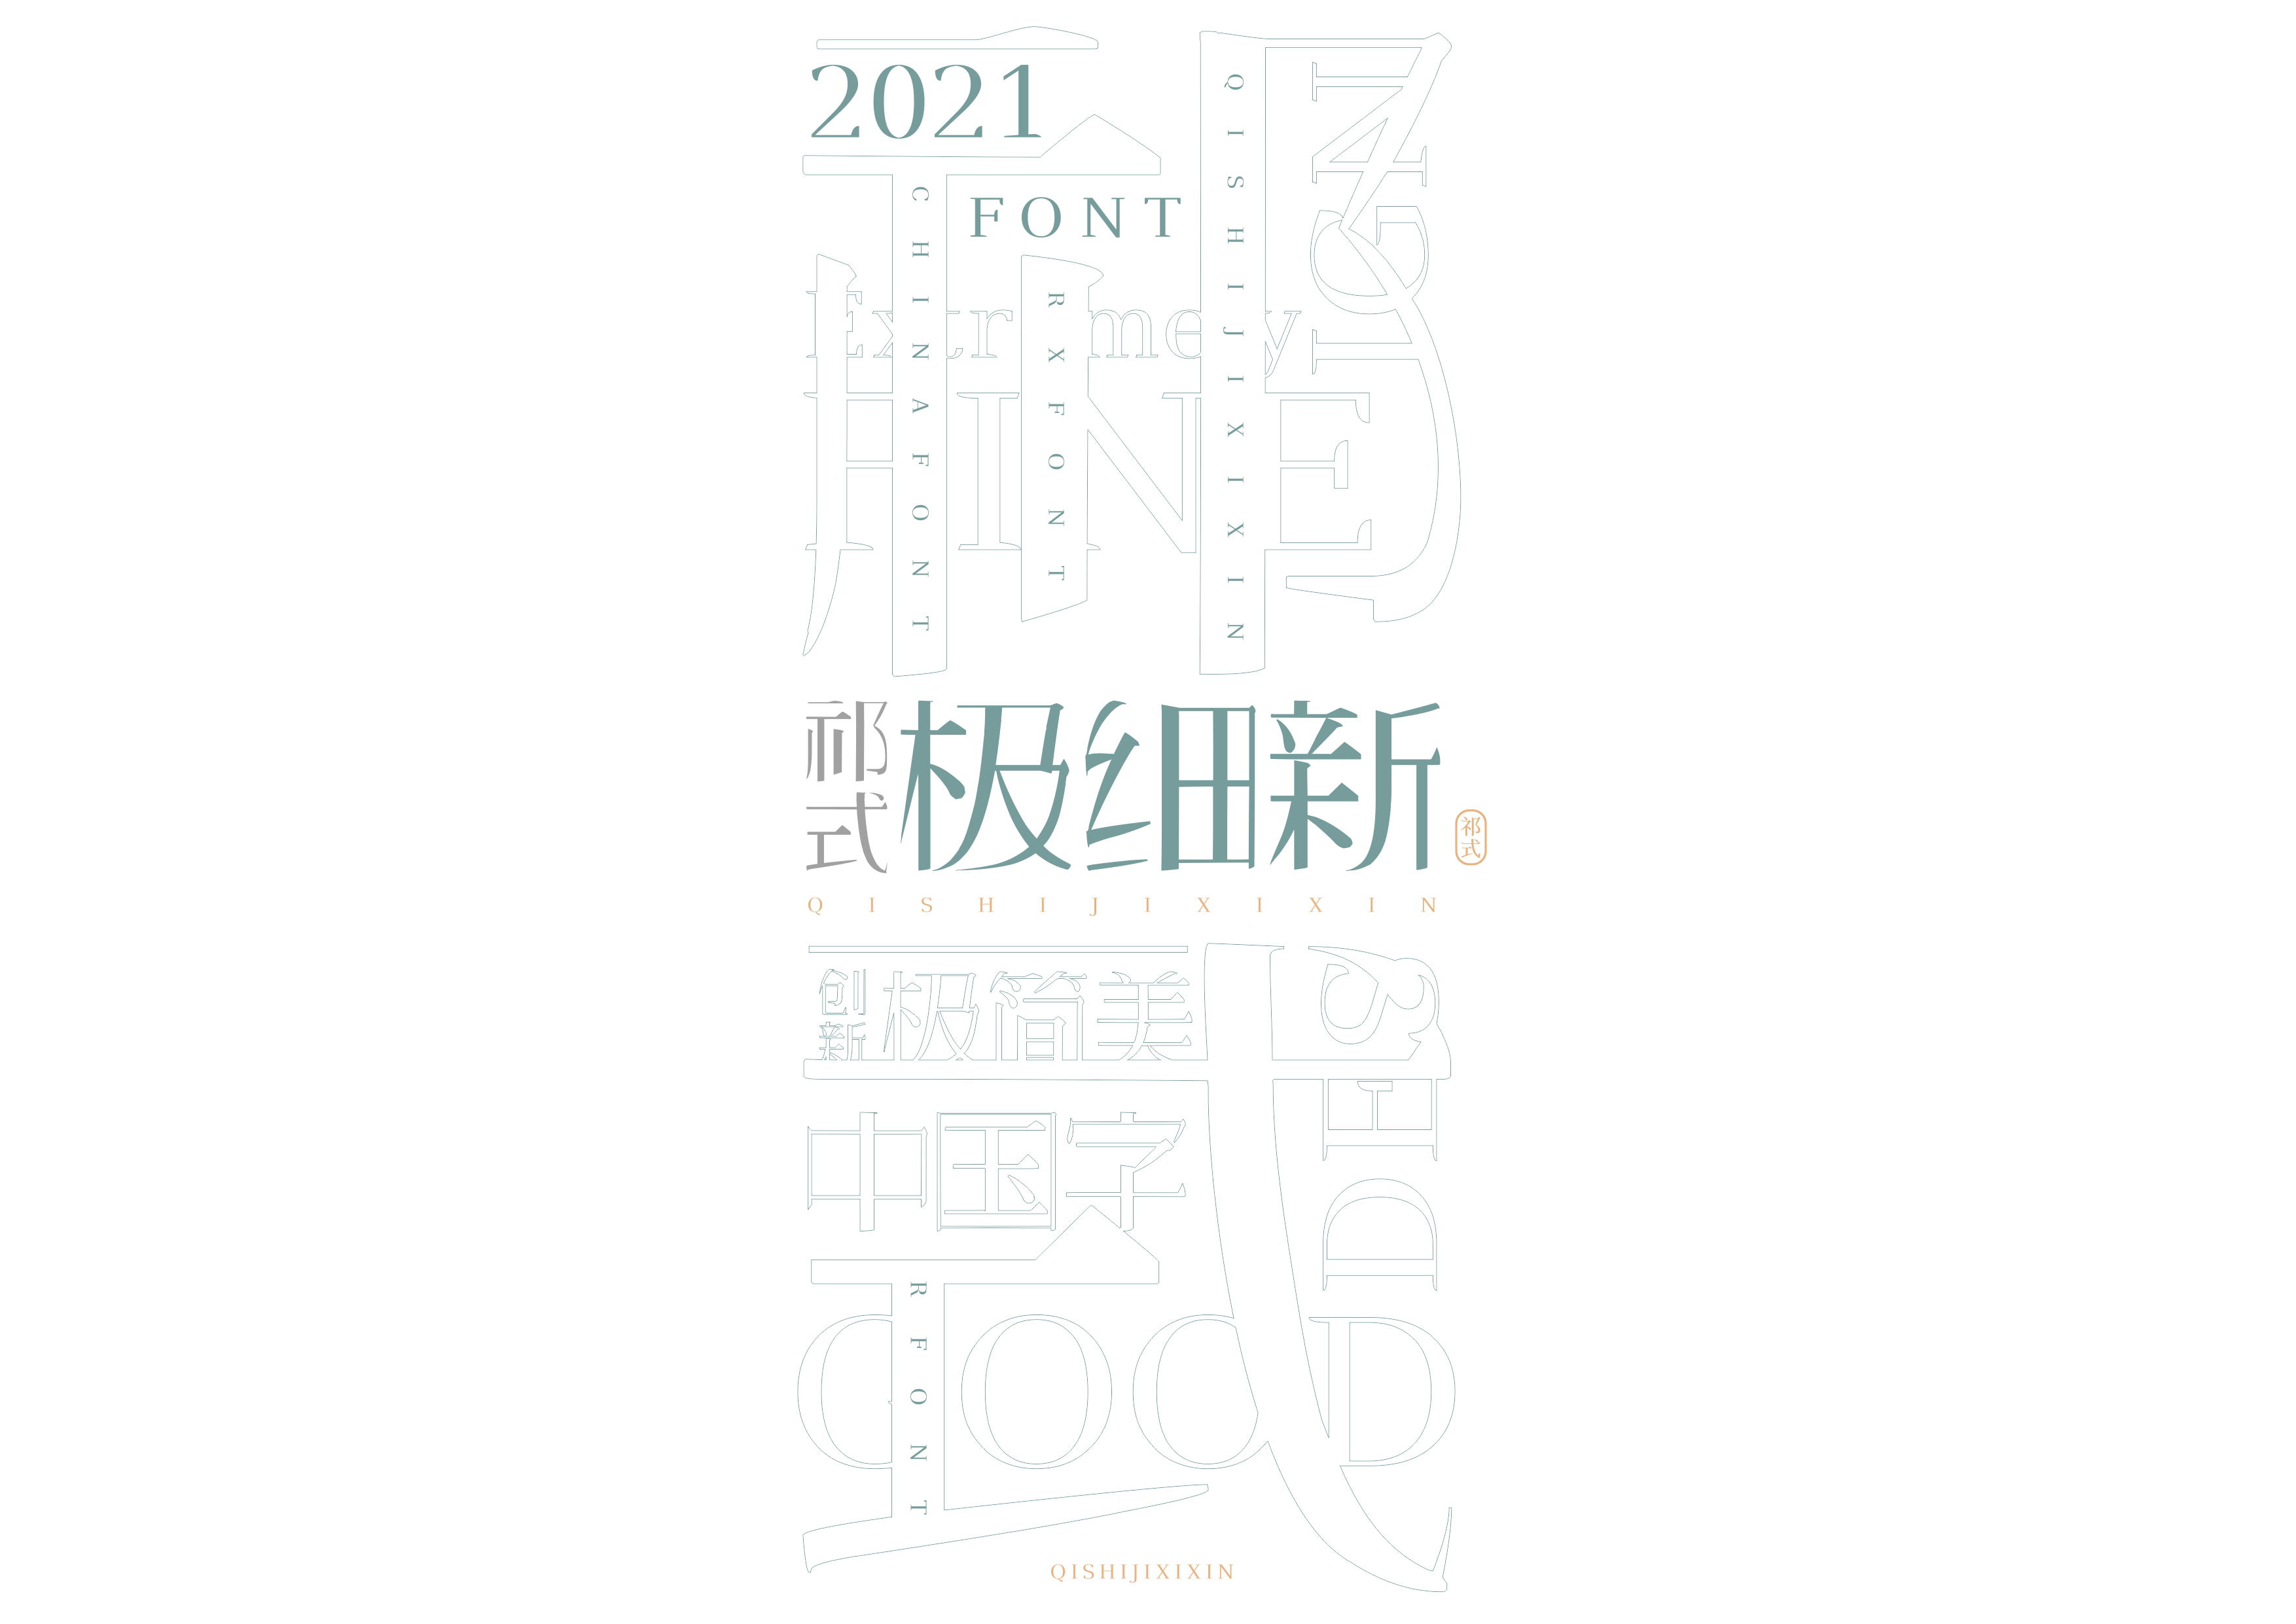 76P Collection of the latest Chinese font design schemes in 2021 #.144